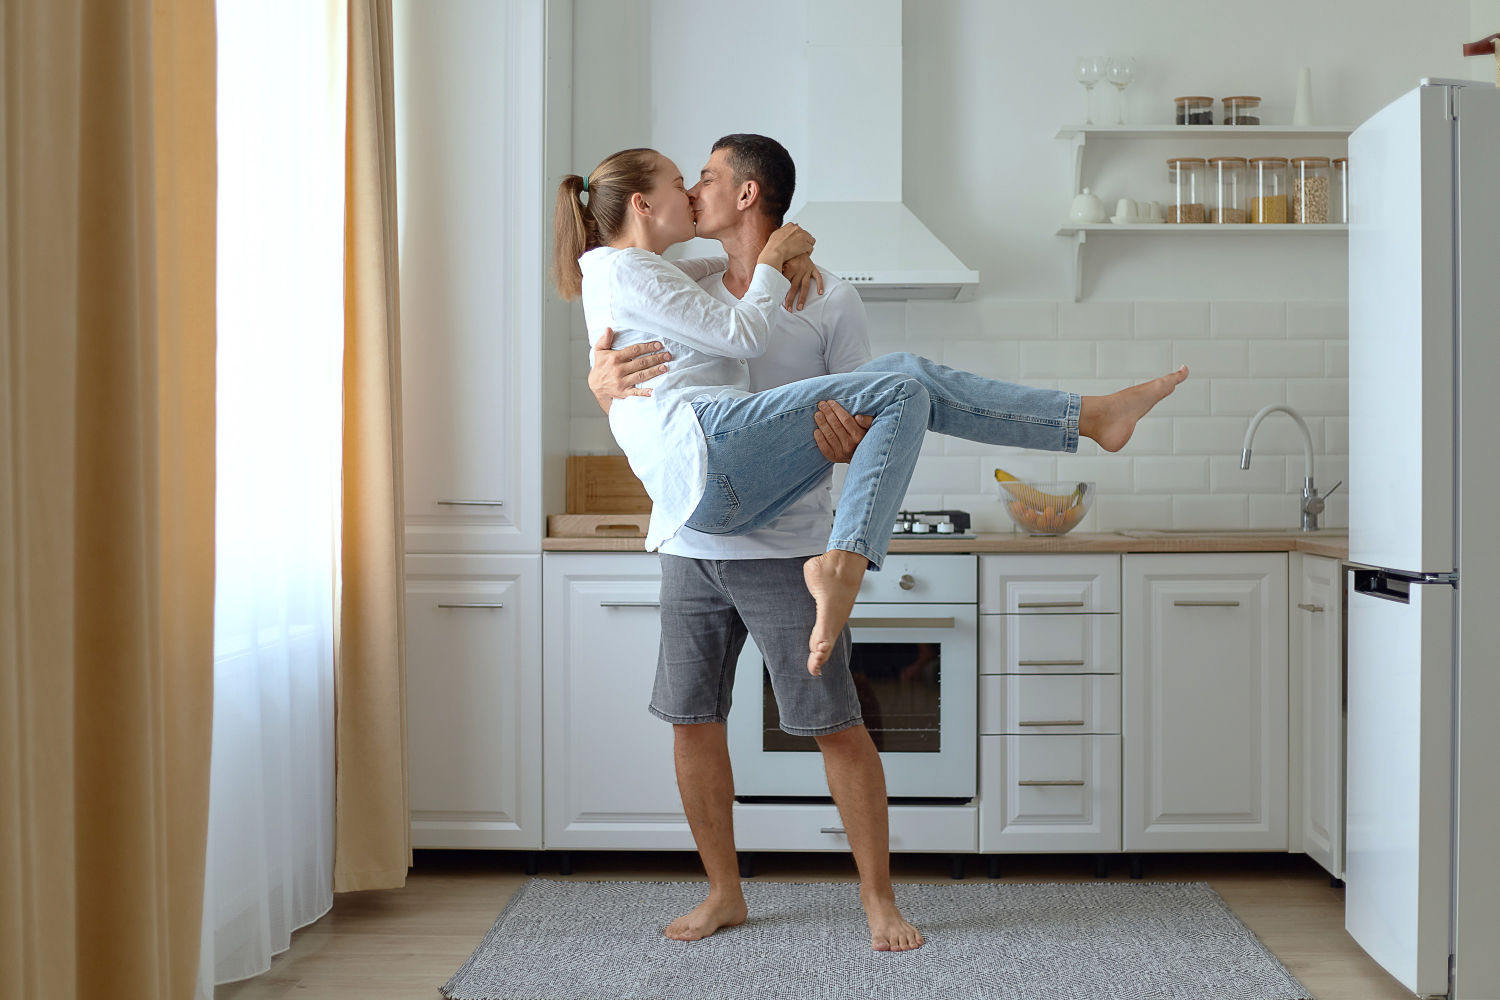 Full length portrait of young man holding his beautiful girlfriend in arms while standing in kitchen at home and kissing her. Both are looking at each other, with love and romantic feelings.